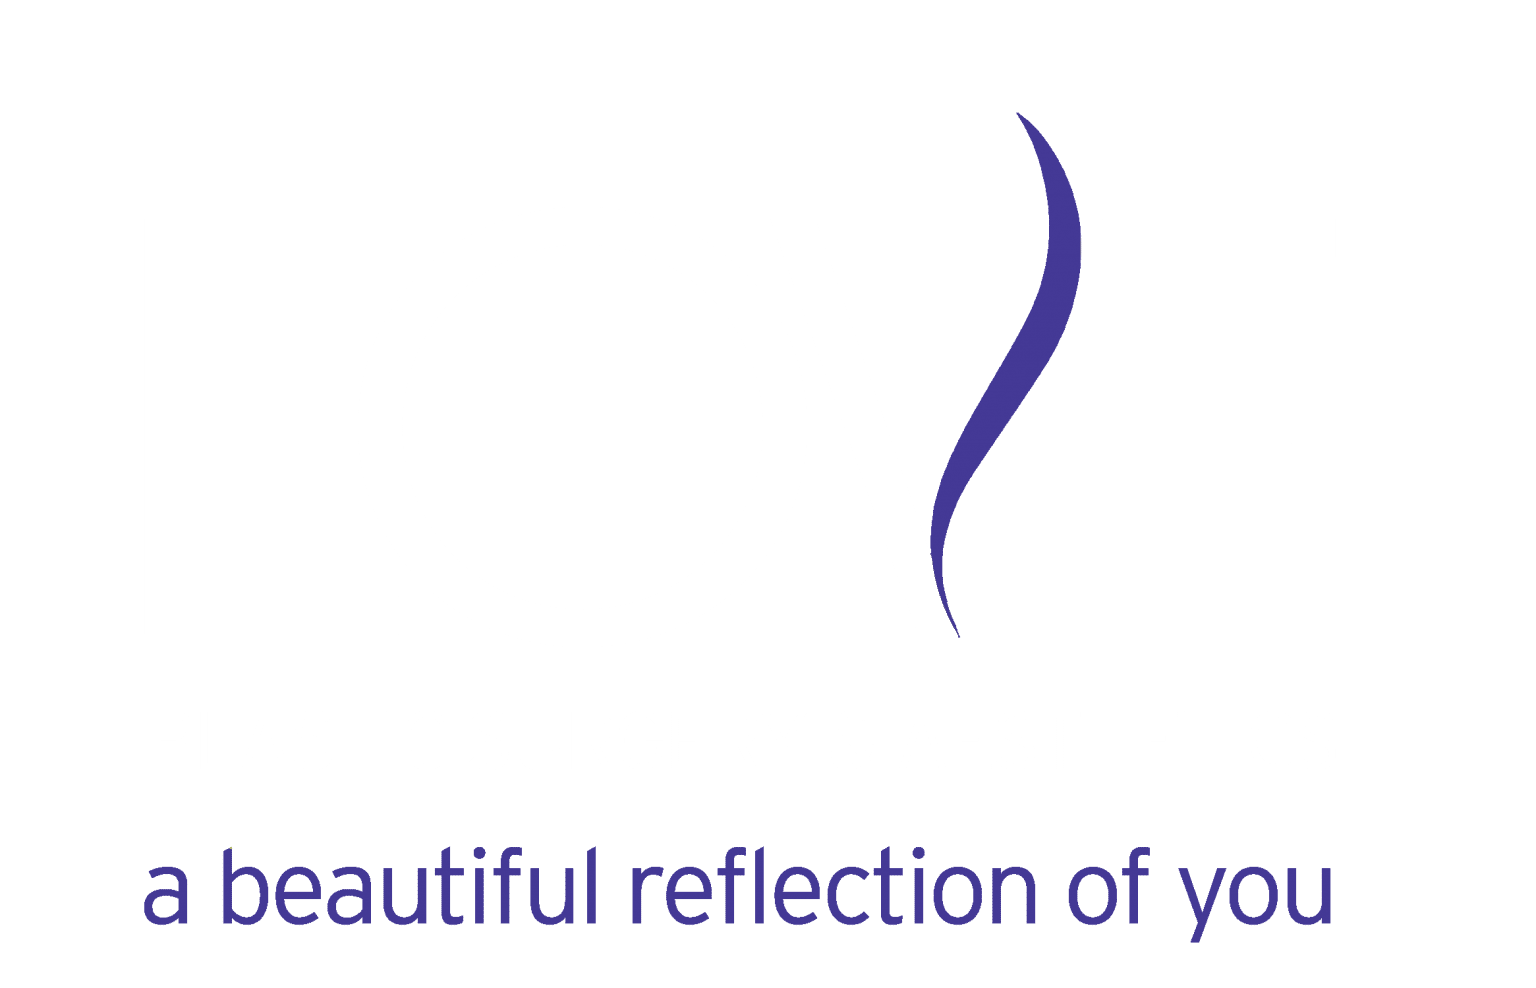 Learn More About Plastic Surgery & Aesthetics in OKC | Dr Tim Love